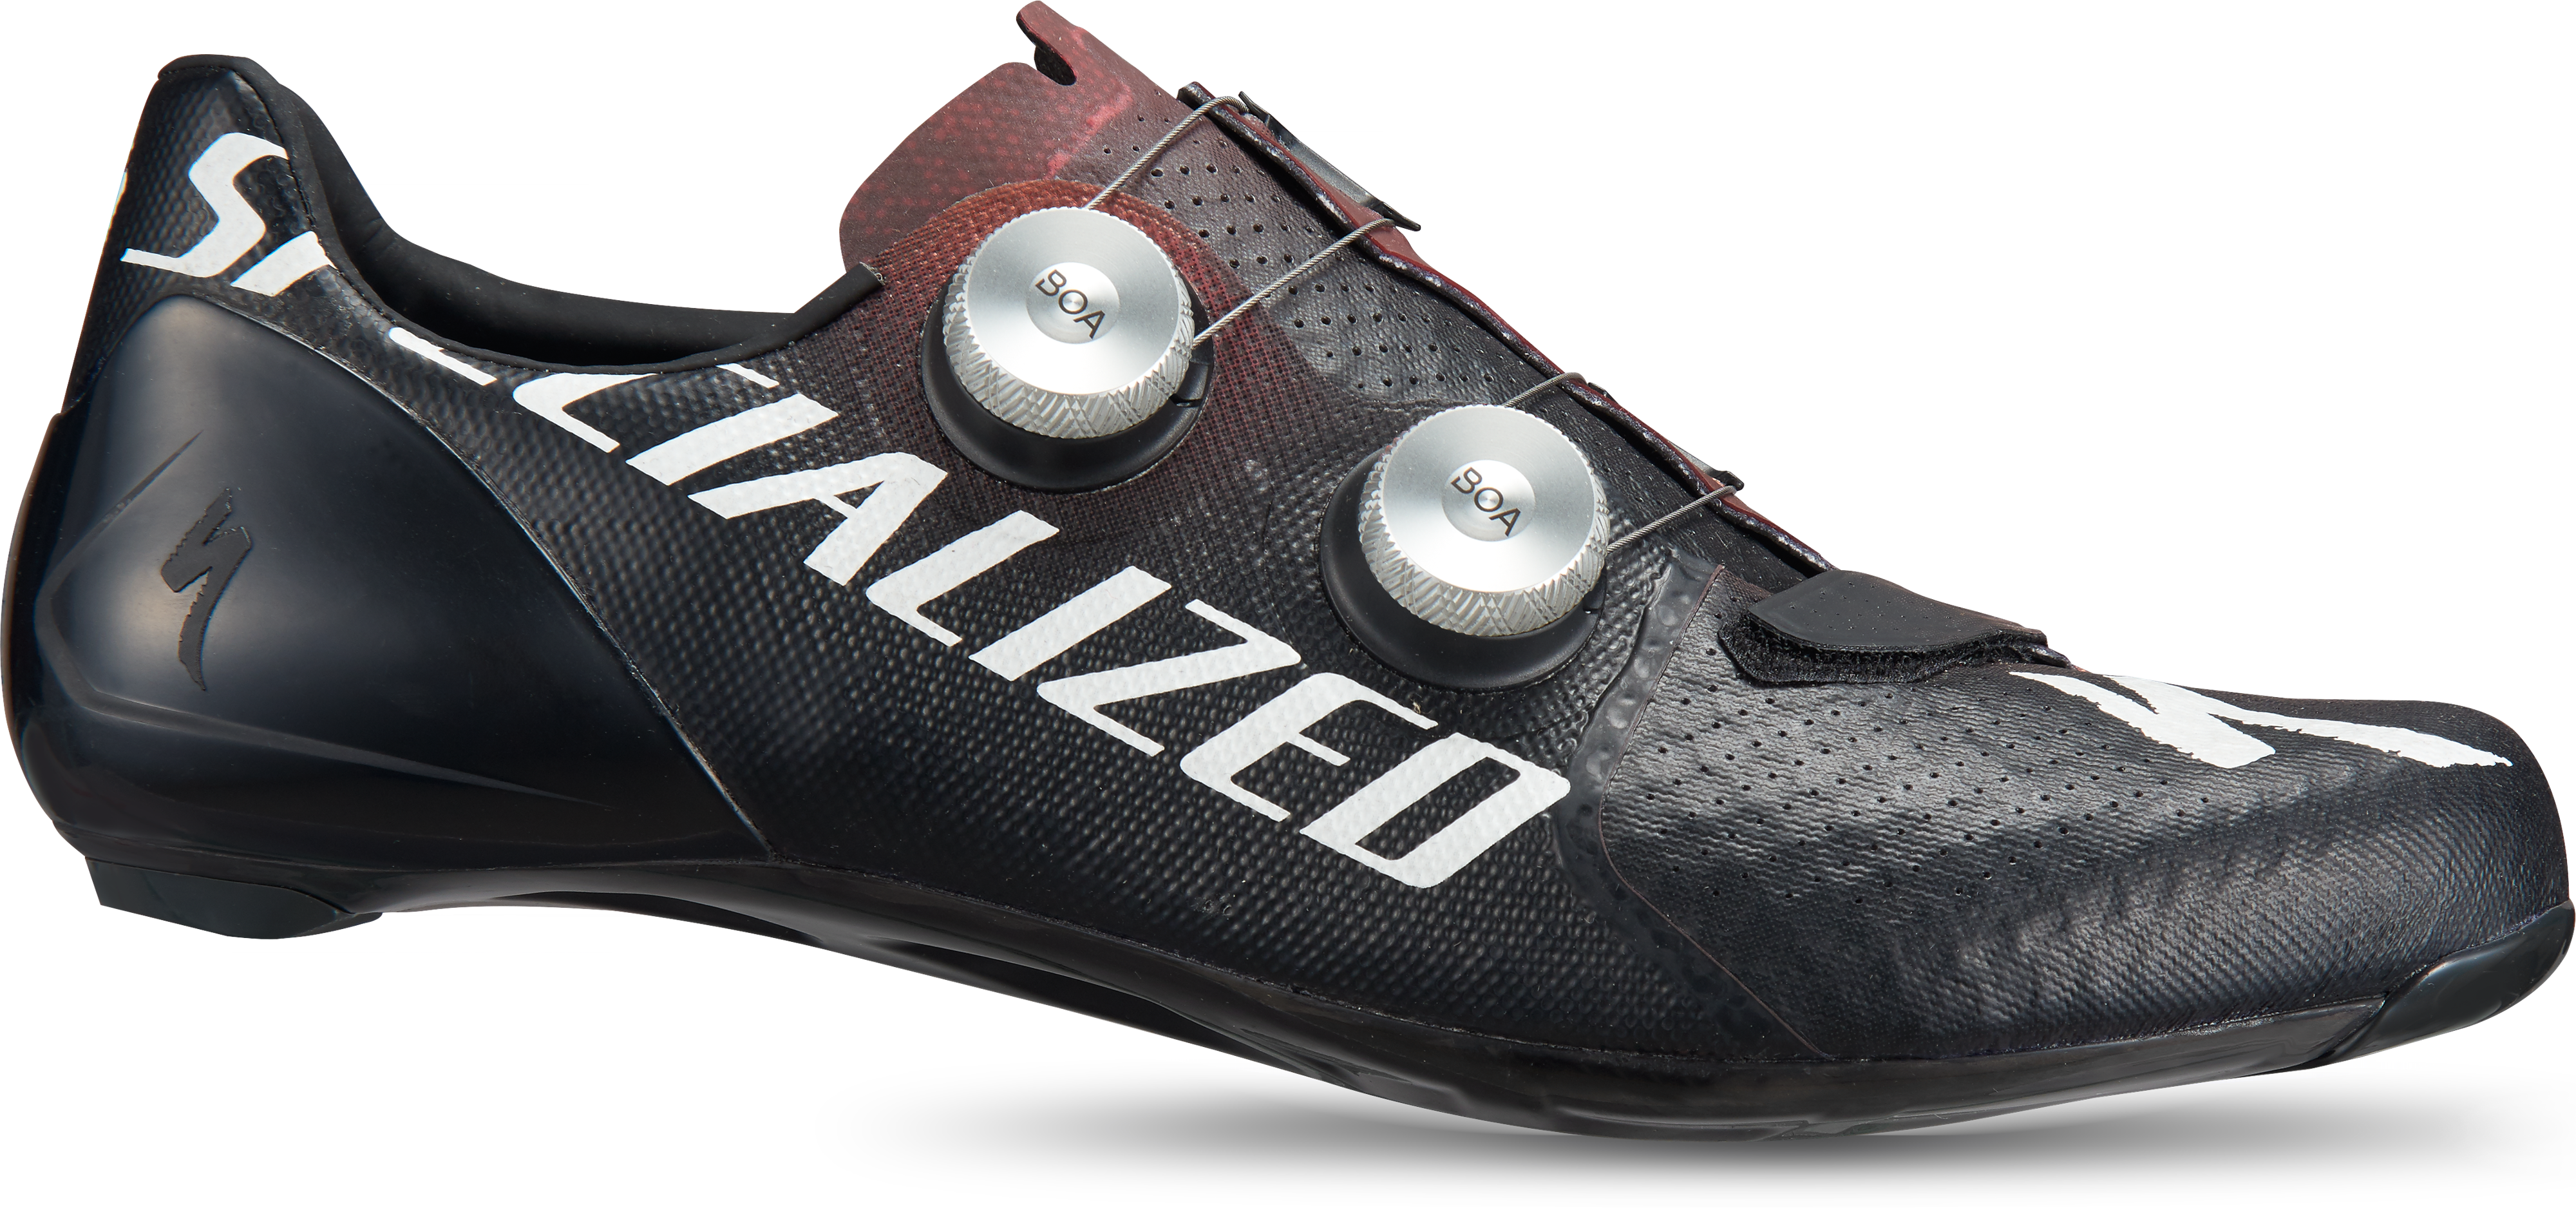 S-WORKS 7 ROAD SHOES SPEED OF LIGHT LTD 44(44 (28.3cm) Speed of